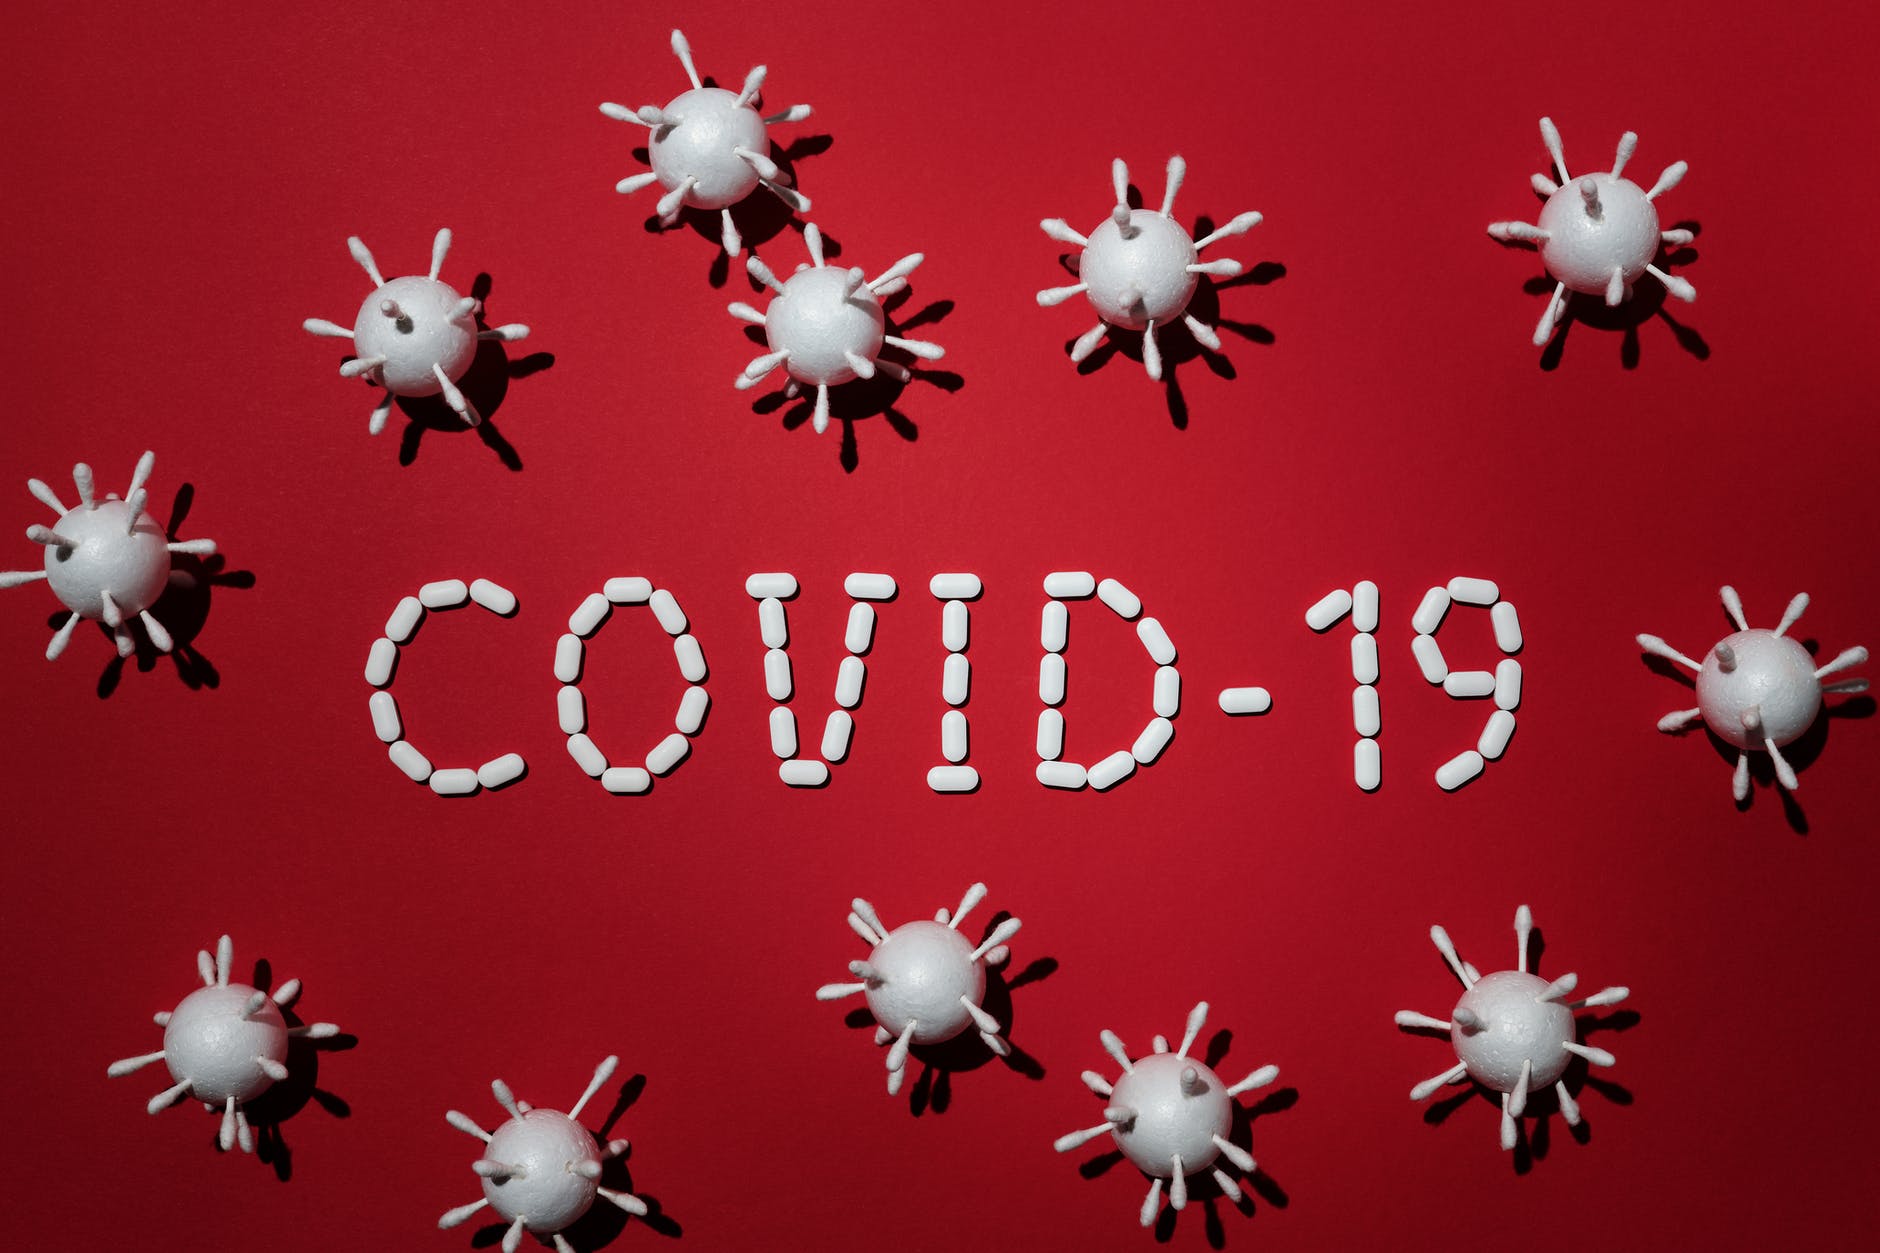 Does Cannabinoid Inhibit COVID-19 Infection?